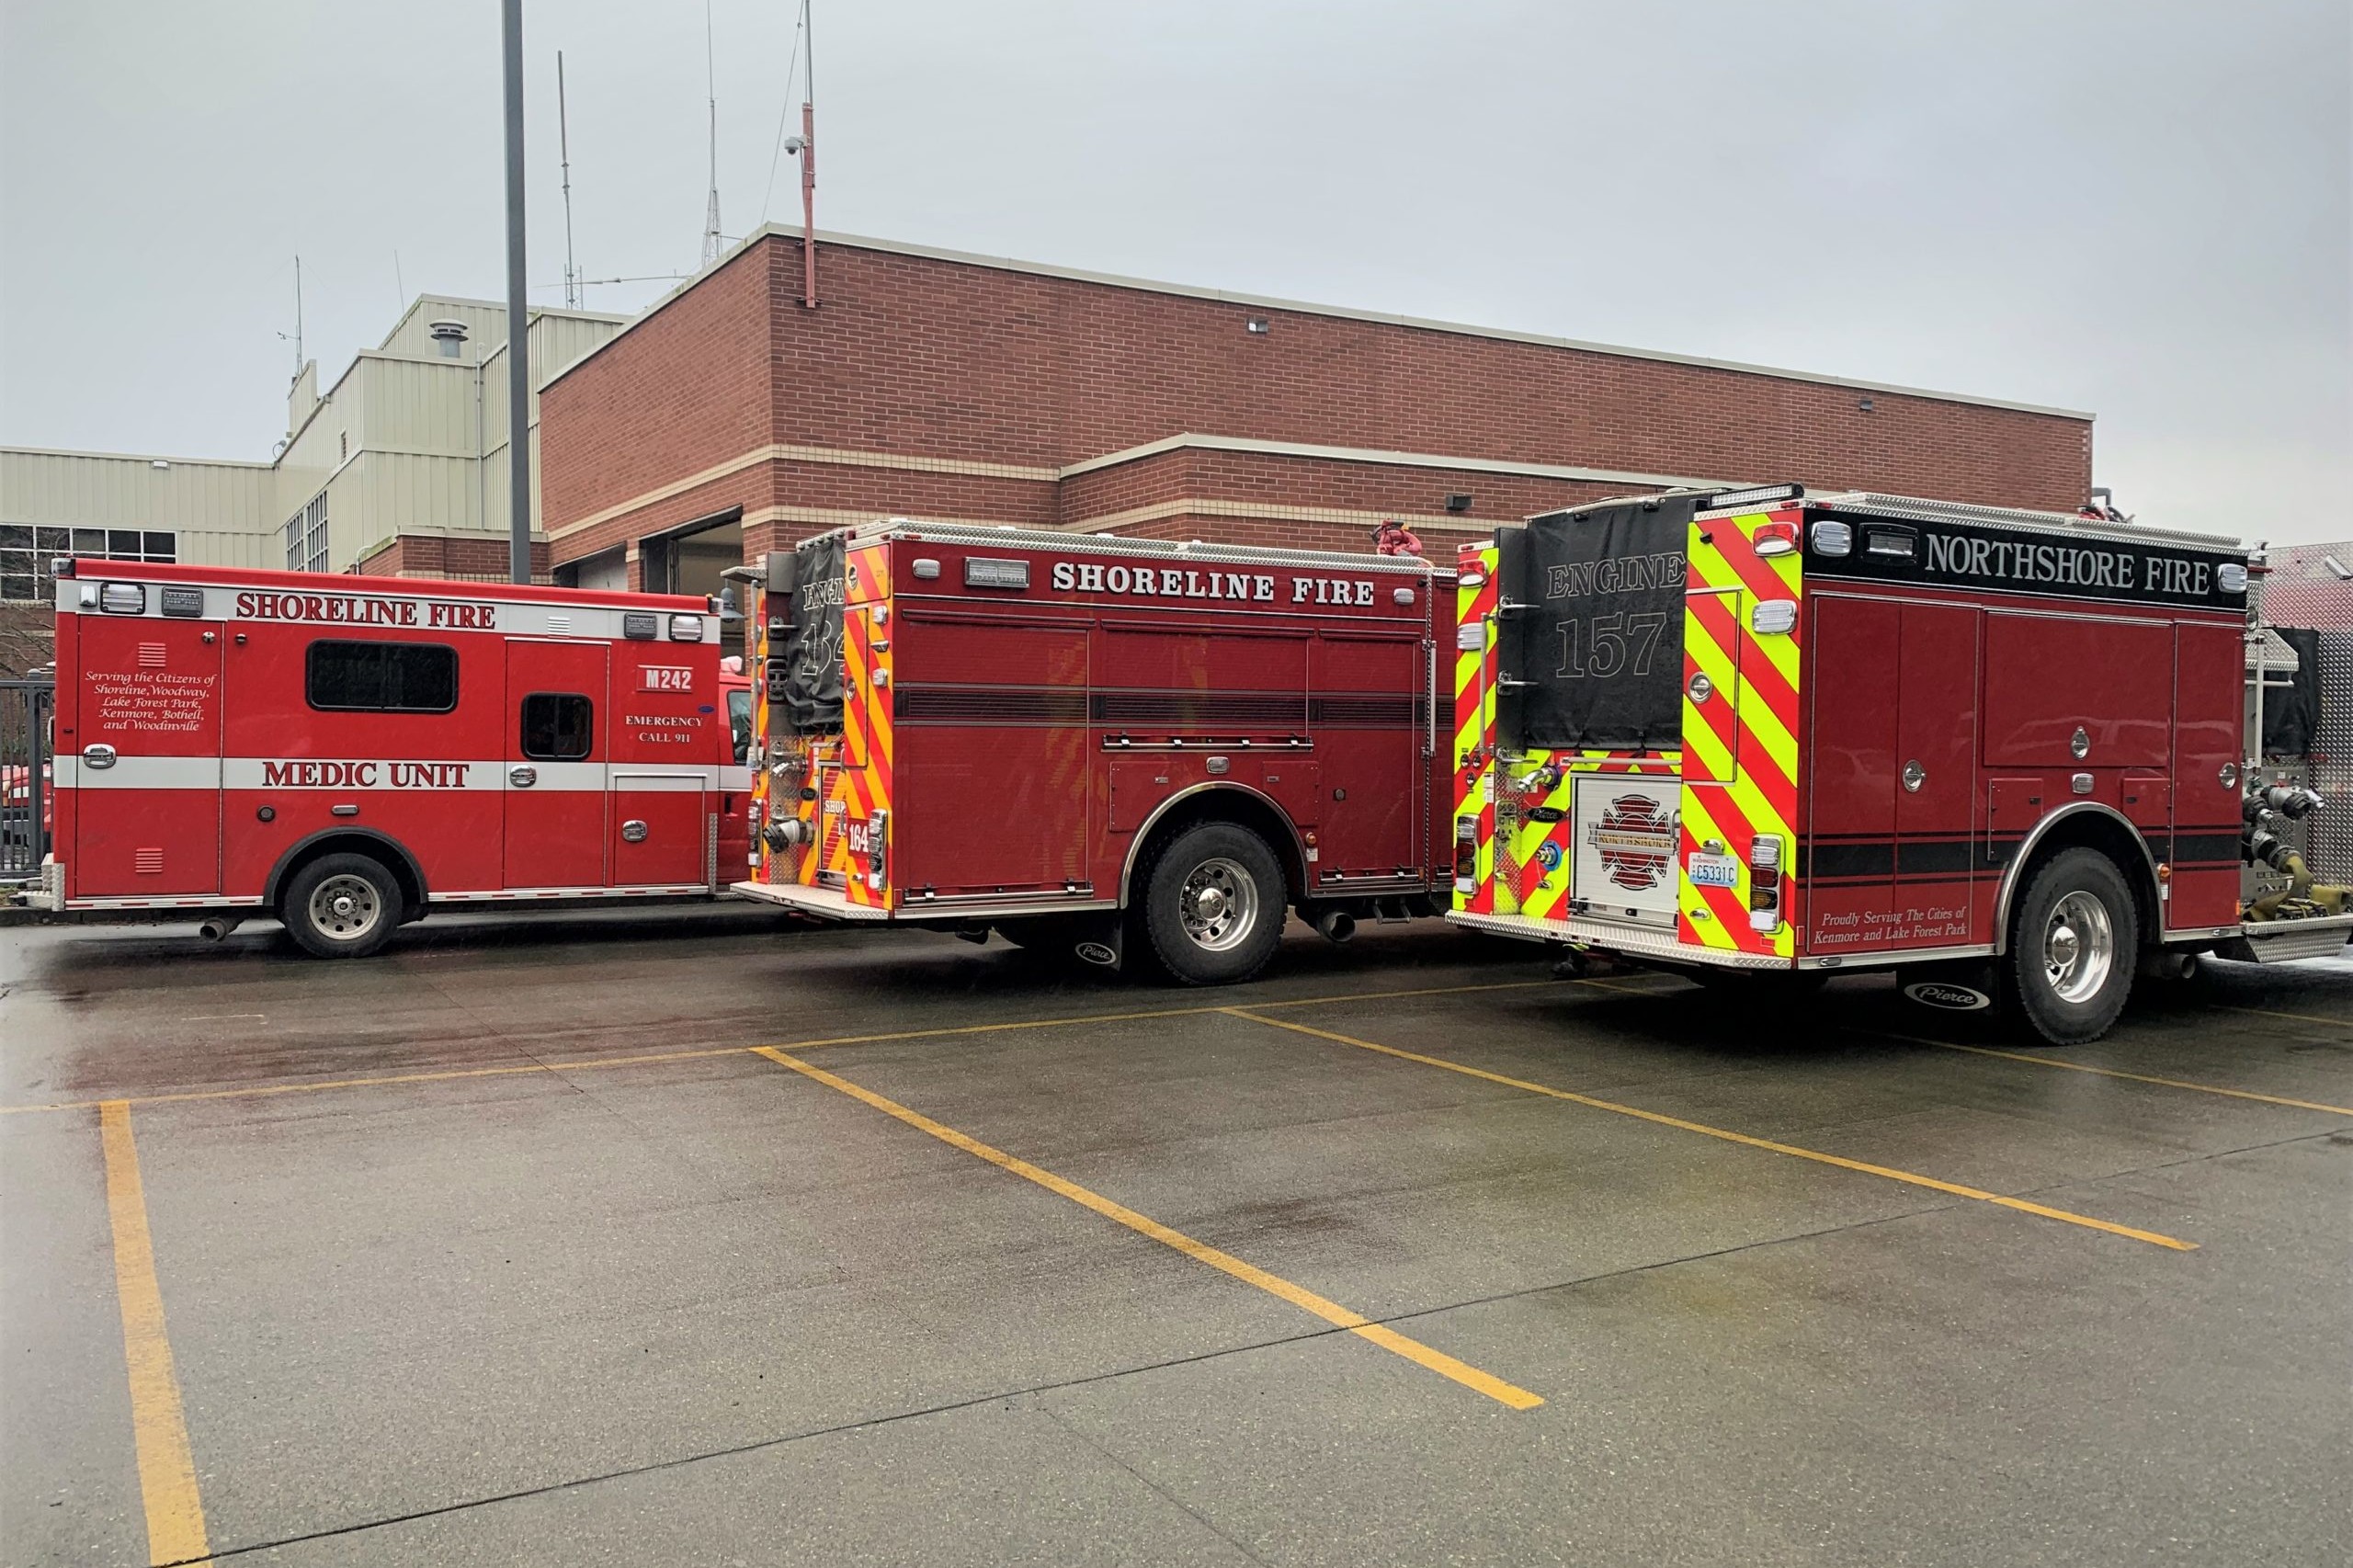 Northshore and Shoreline Fire engines